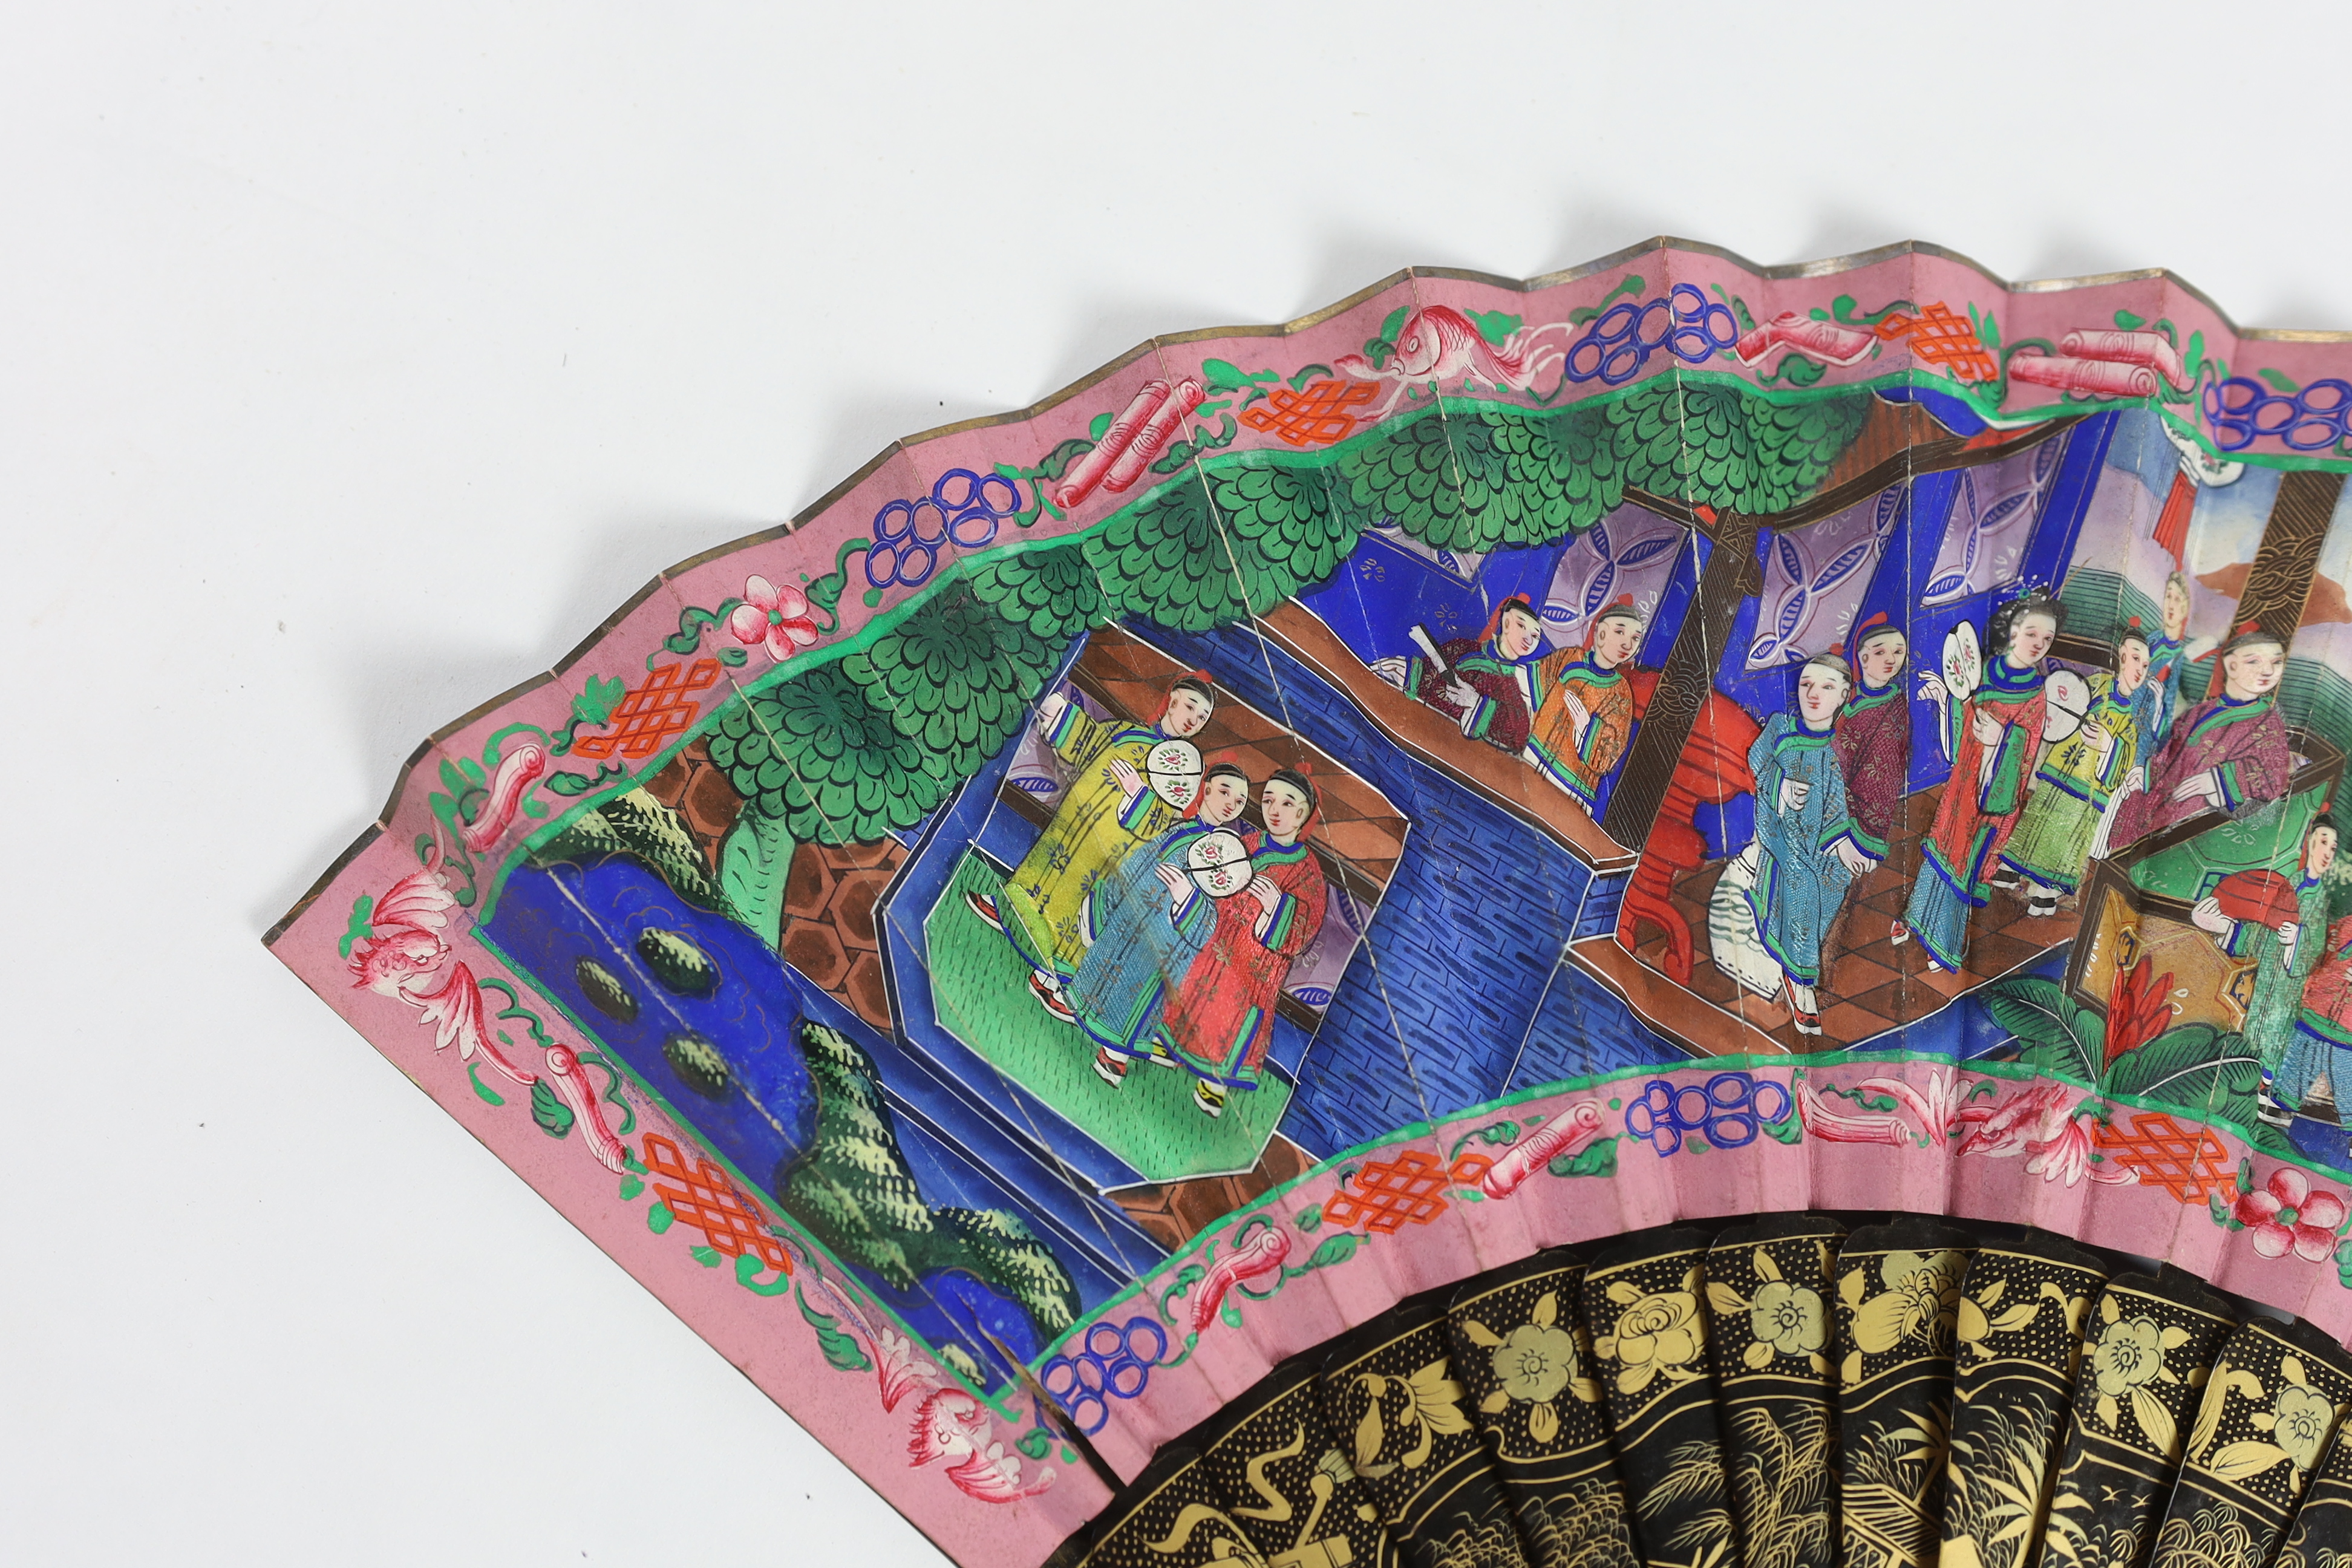 A 19th century Chinese ornately lacquered and hand painted figural leaf fan, the figures on the leaf having painted ivory faces, the back of the fan painted with exotic birds and flowers, CITES Submission reference TJUZX